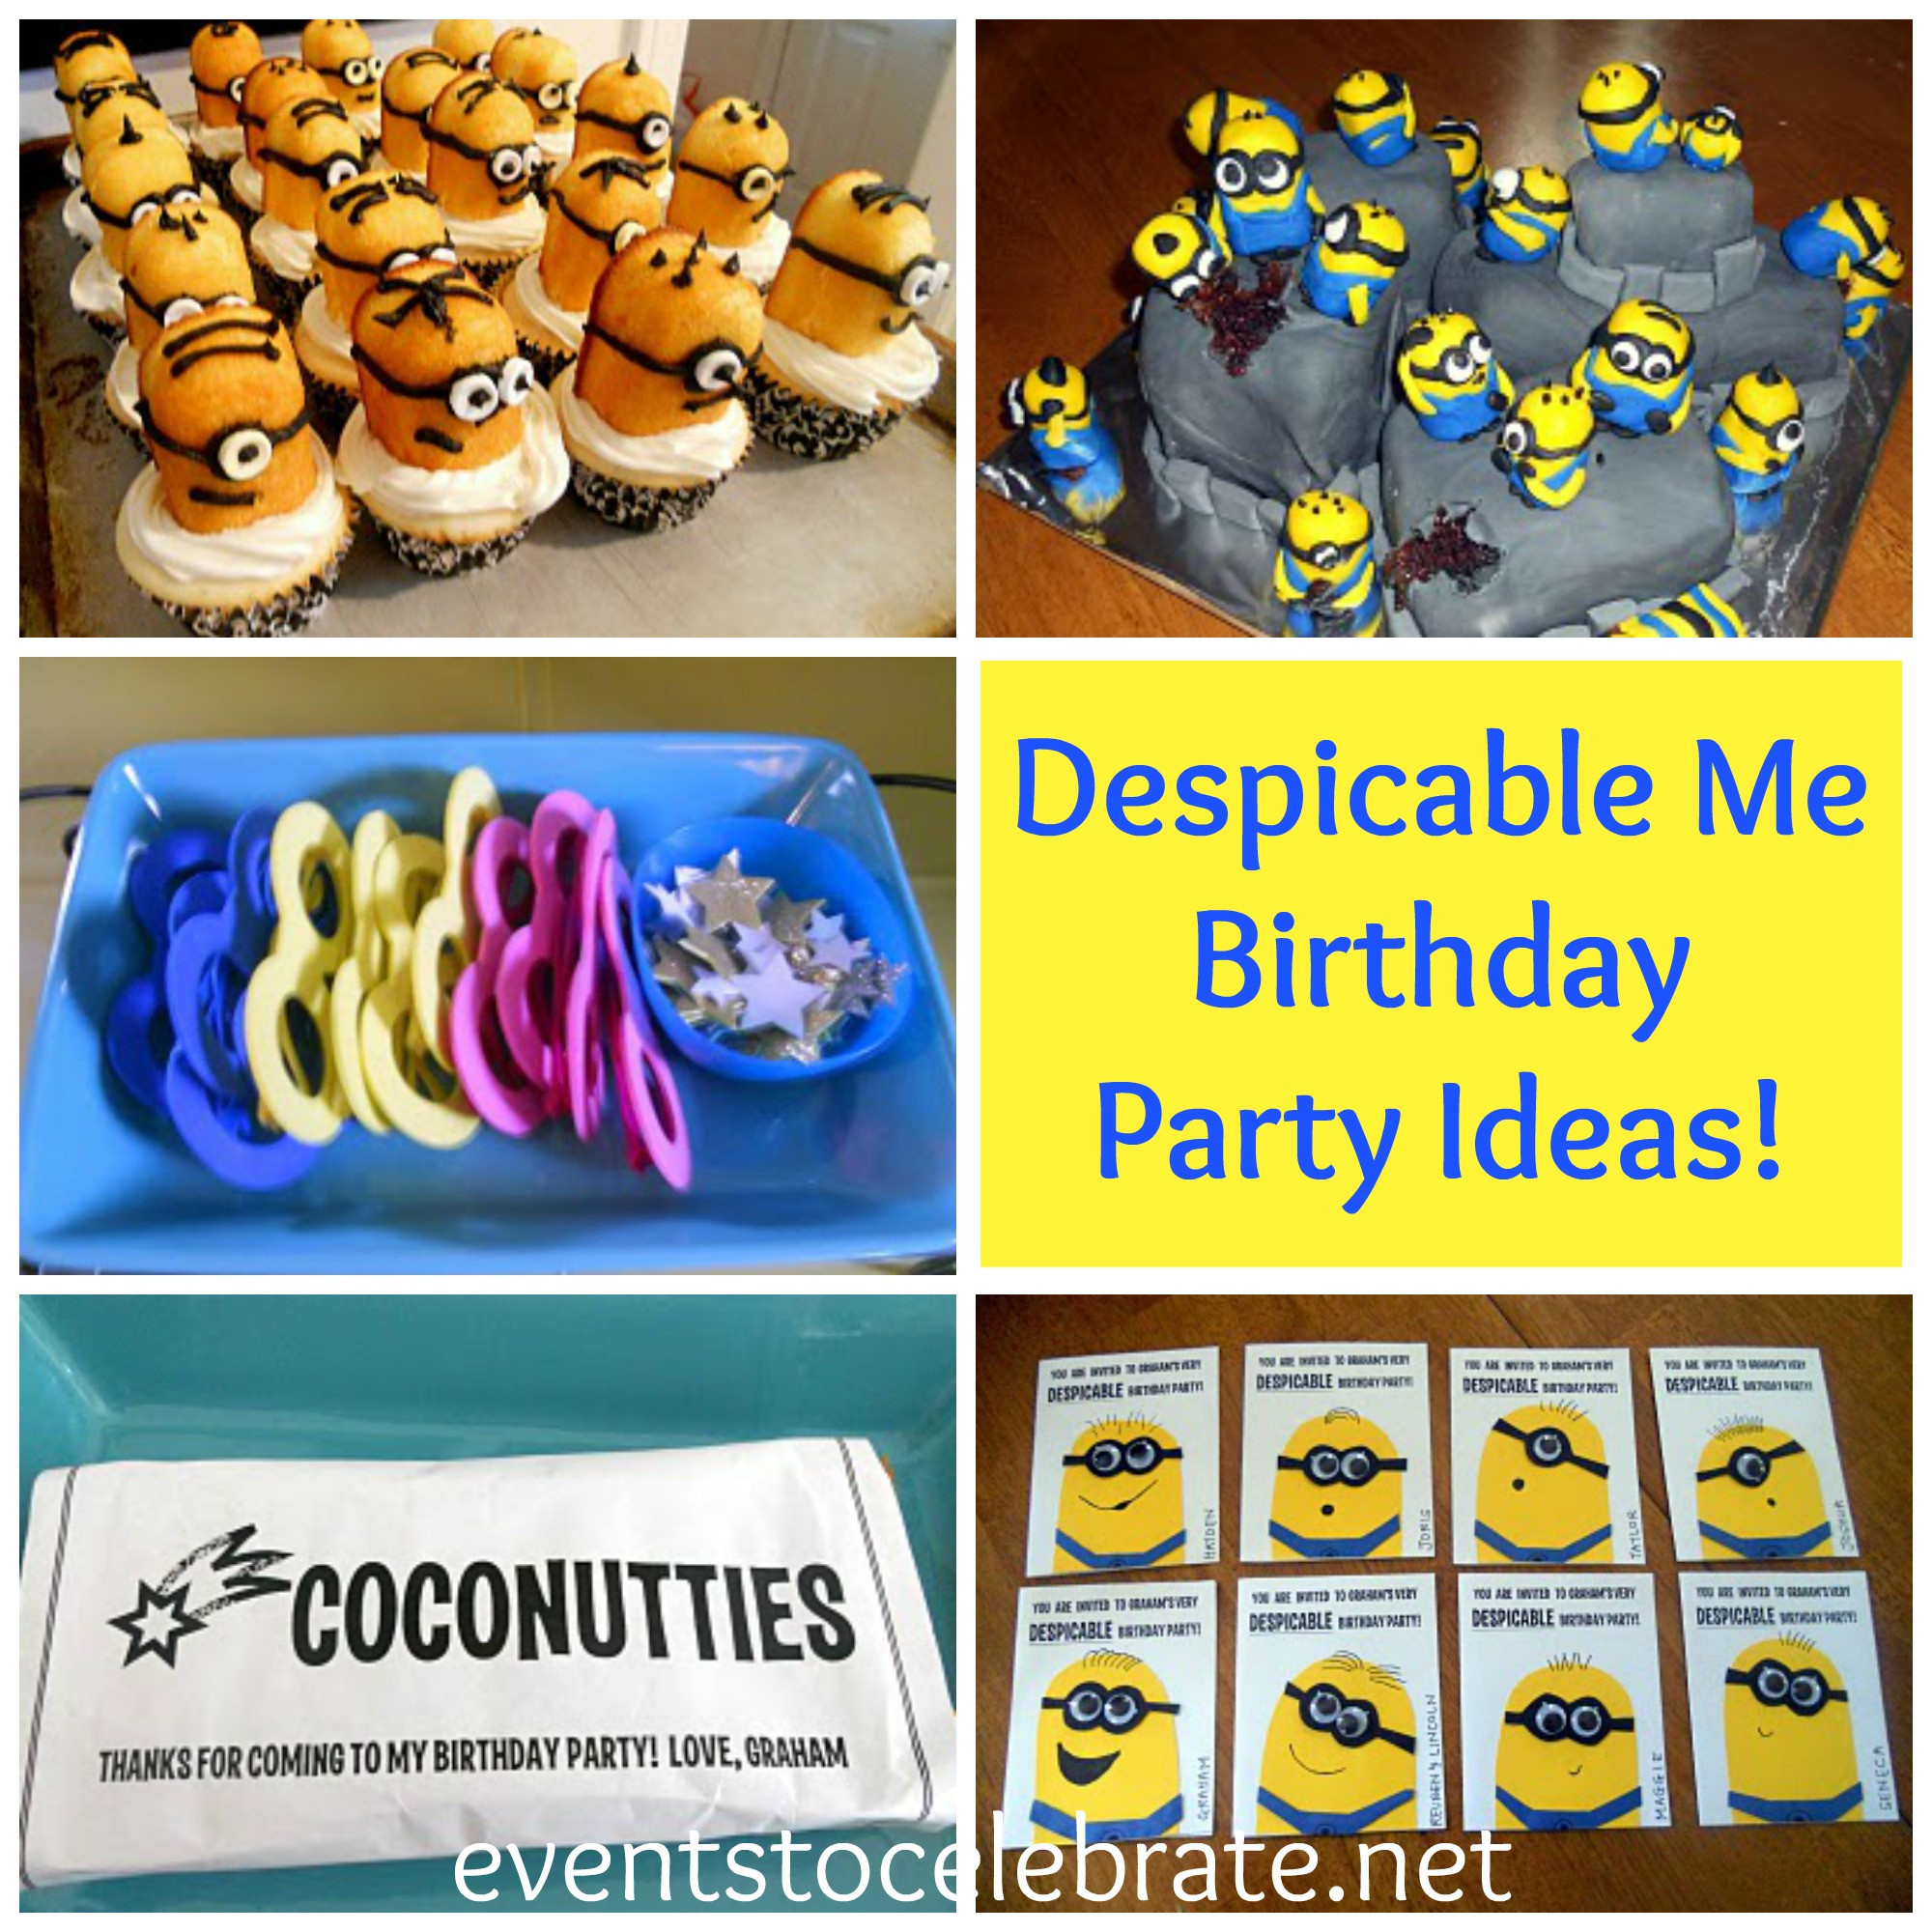 Despicable Me Birthday Decorations
 Despicable Me Archives events to CELEBRATE